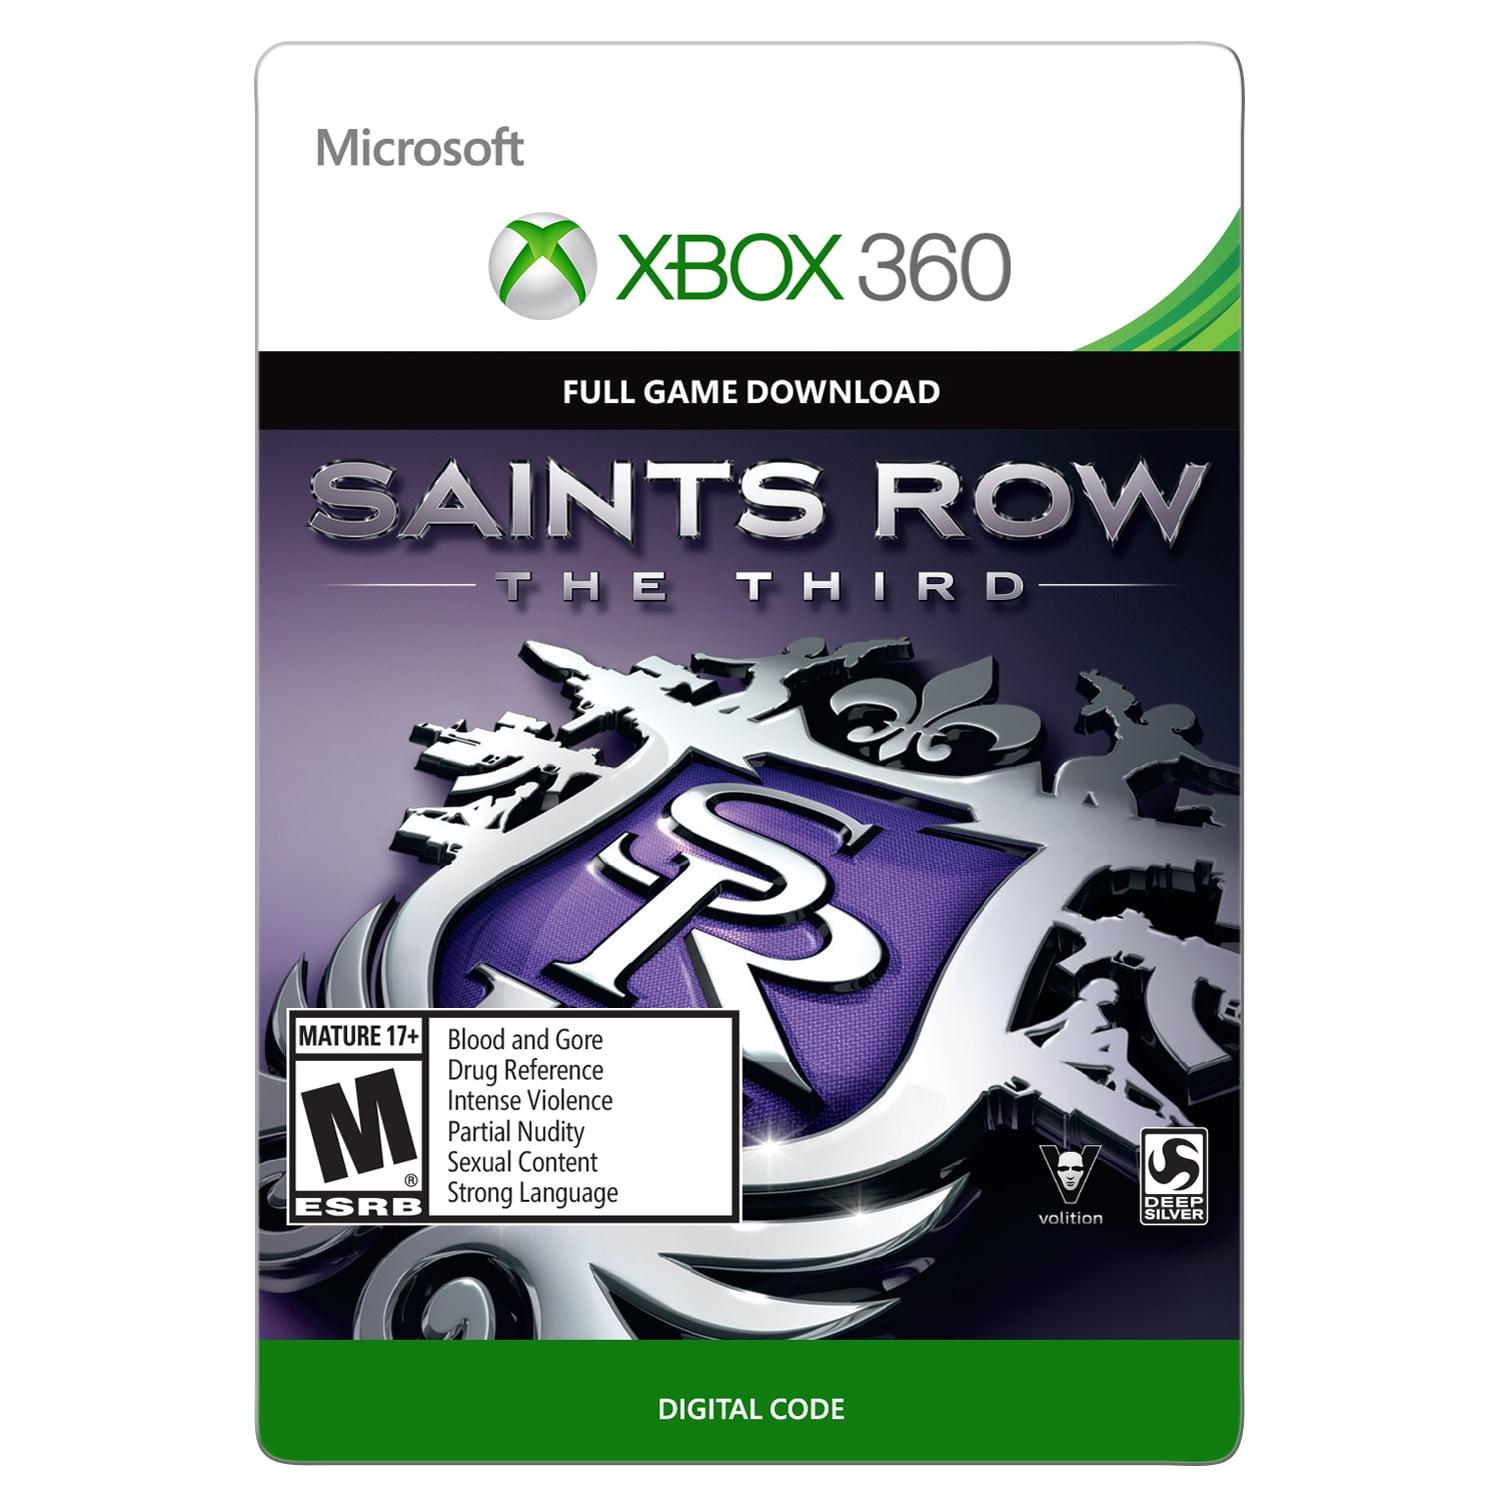 Xbox 360 : Saints Row: The Third- The Full Package VideoGames 752919555057